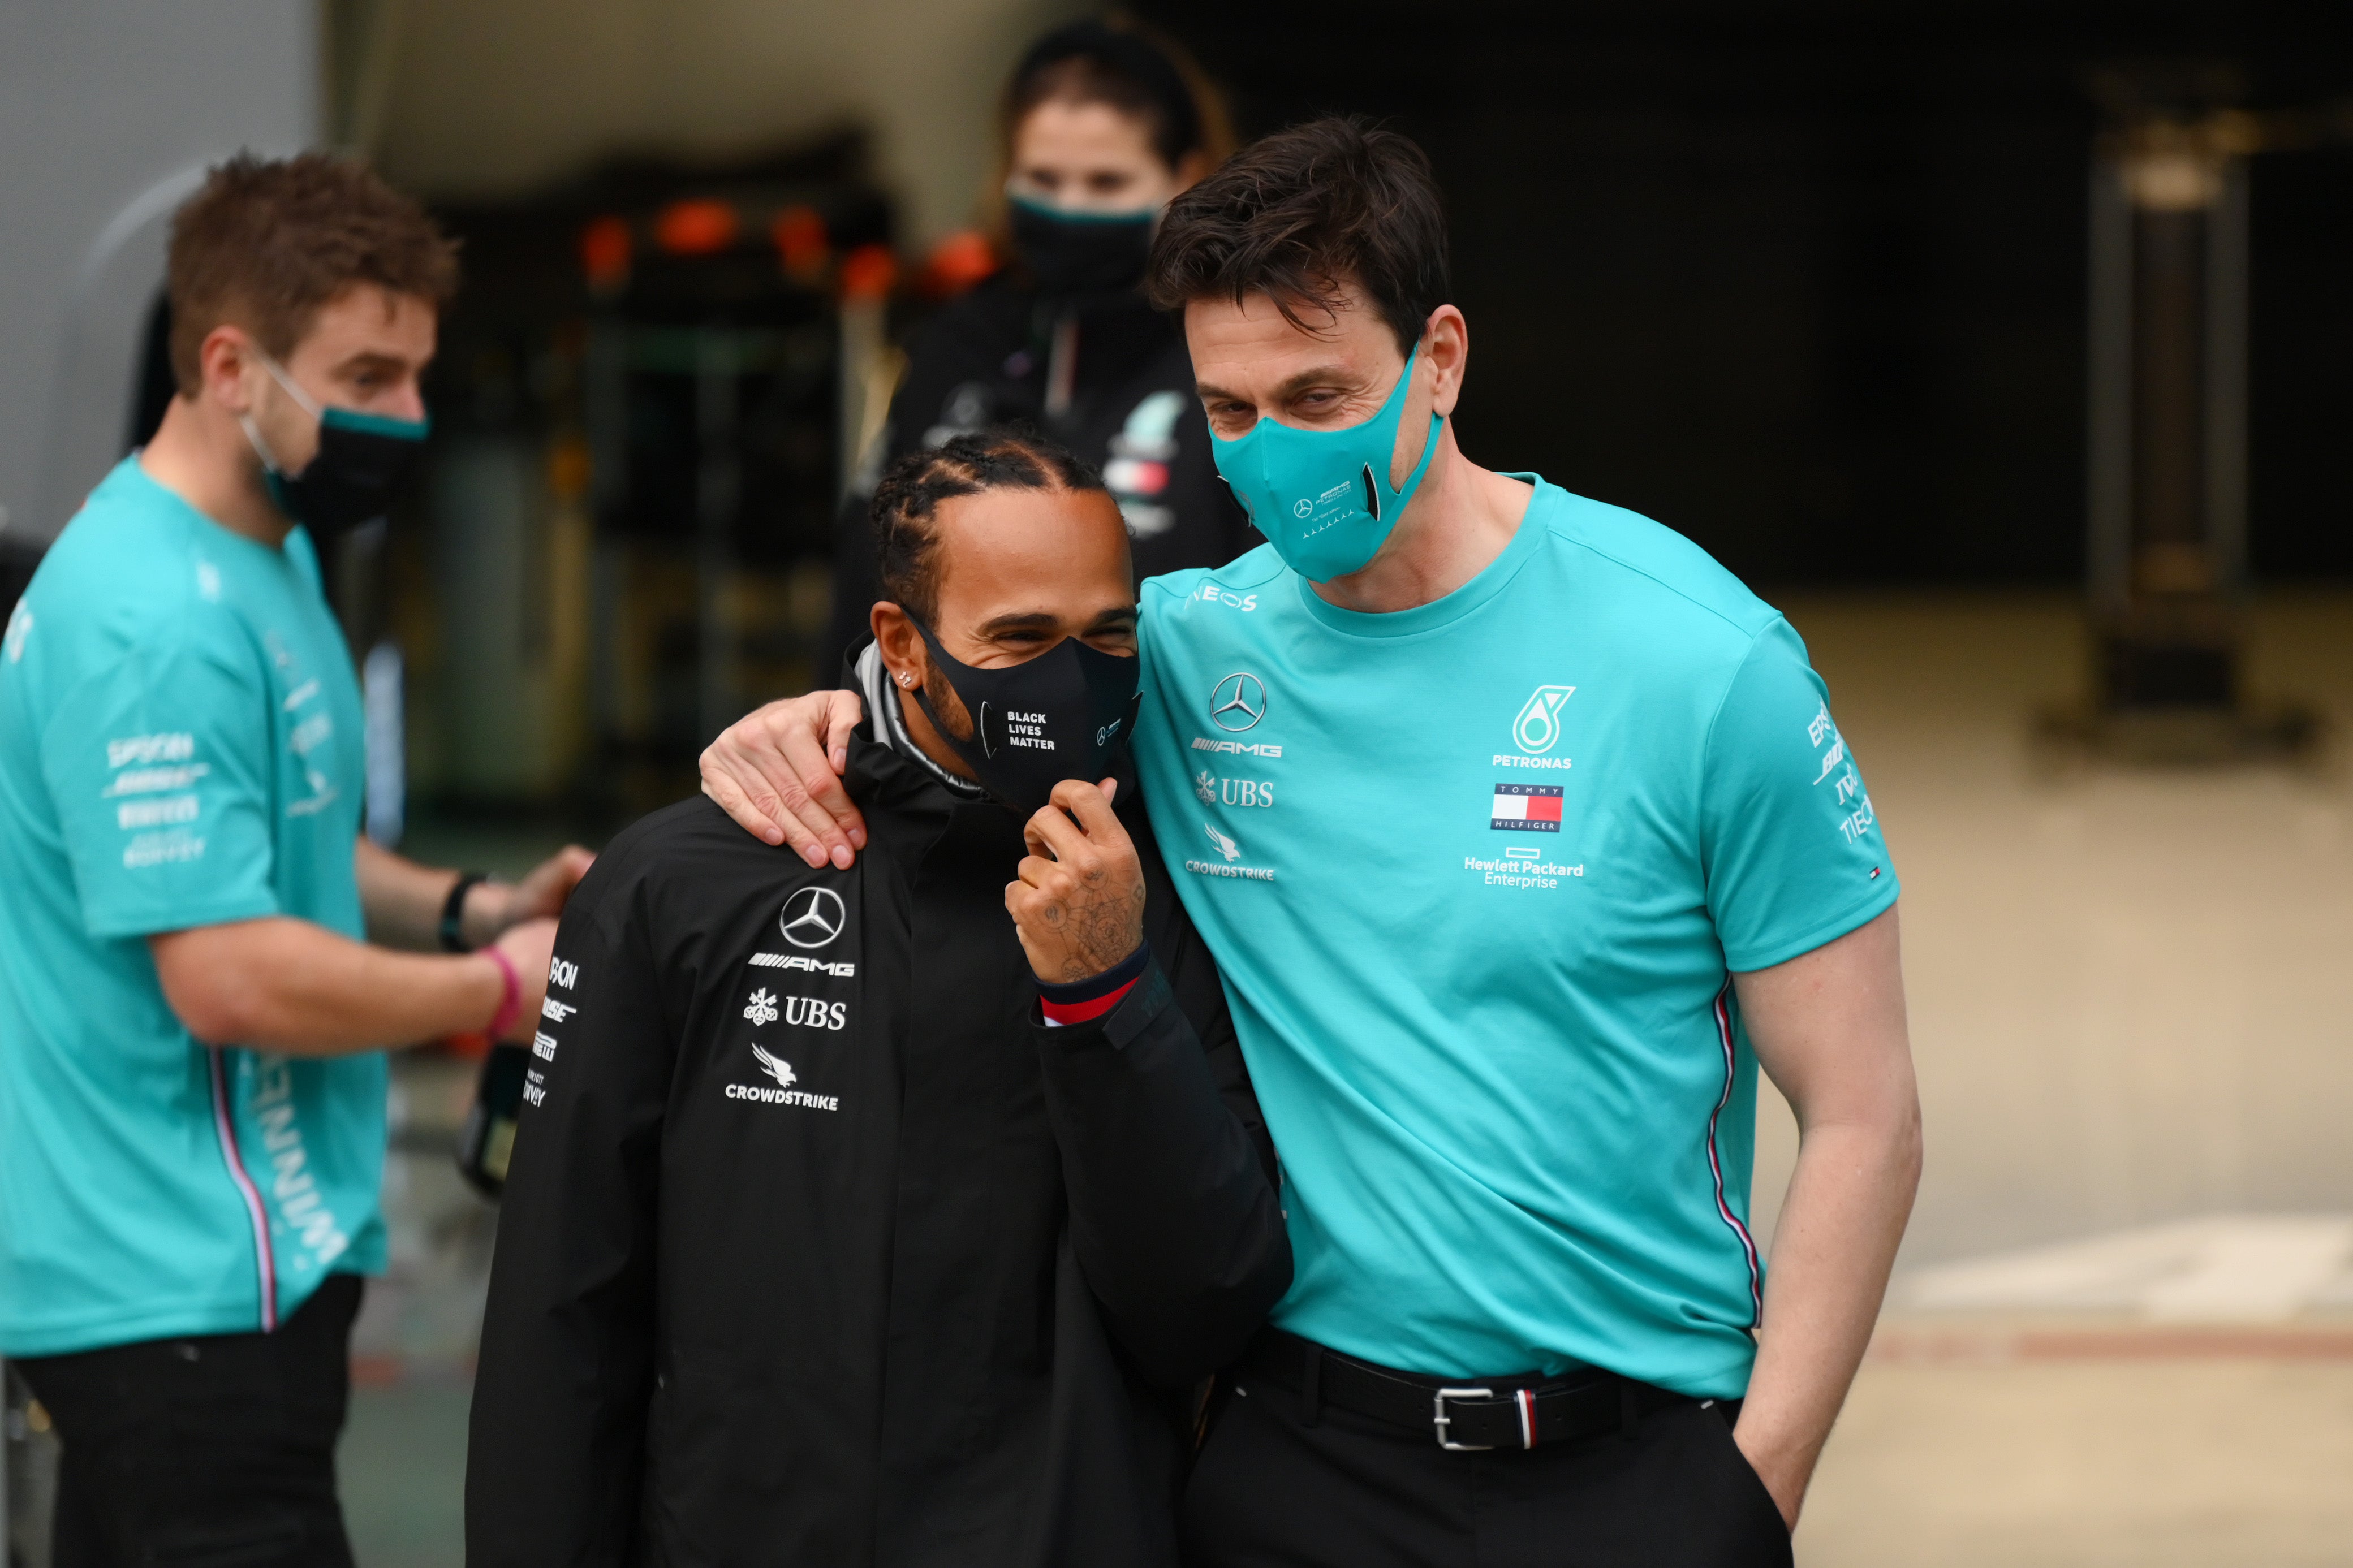 Lewis Hamilton and Mercedes boss Toto Wolff